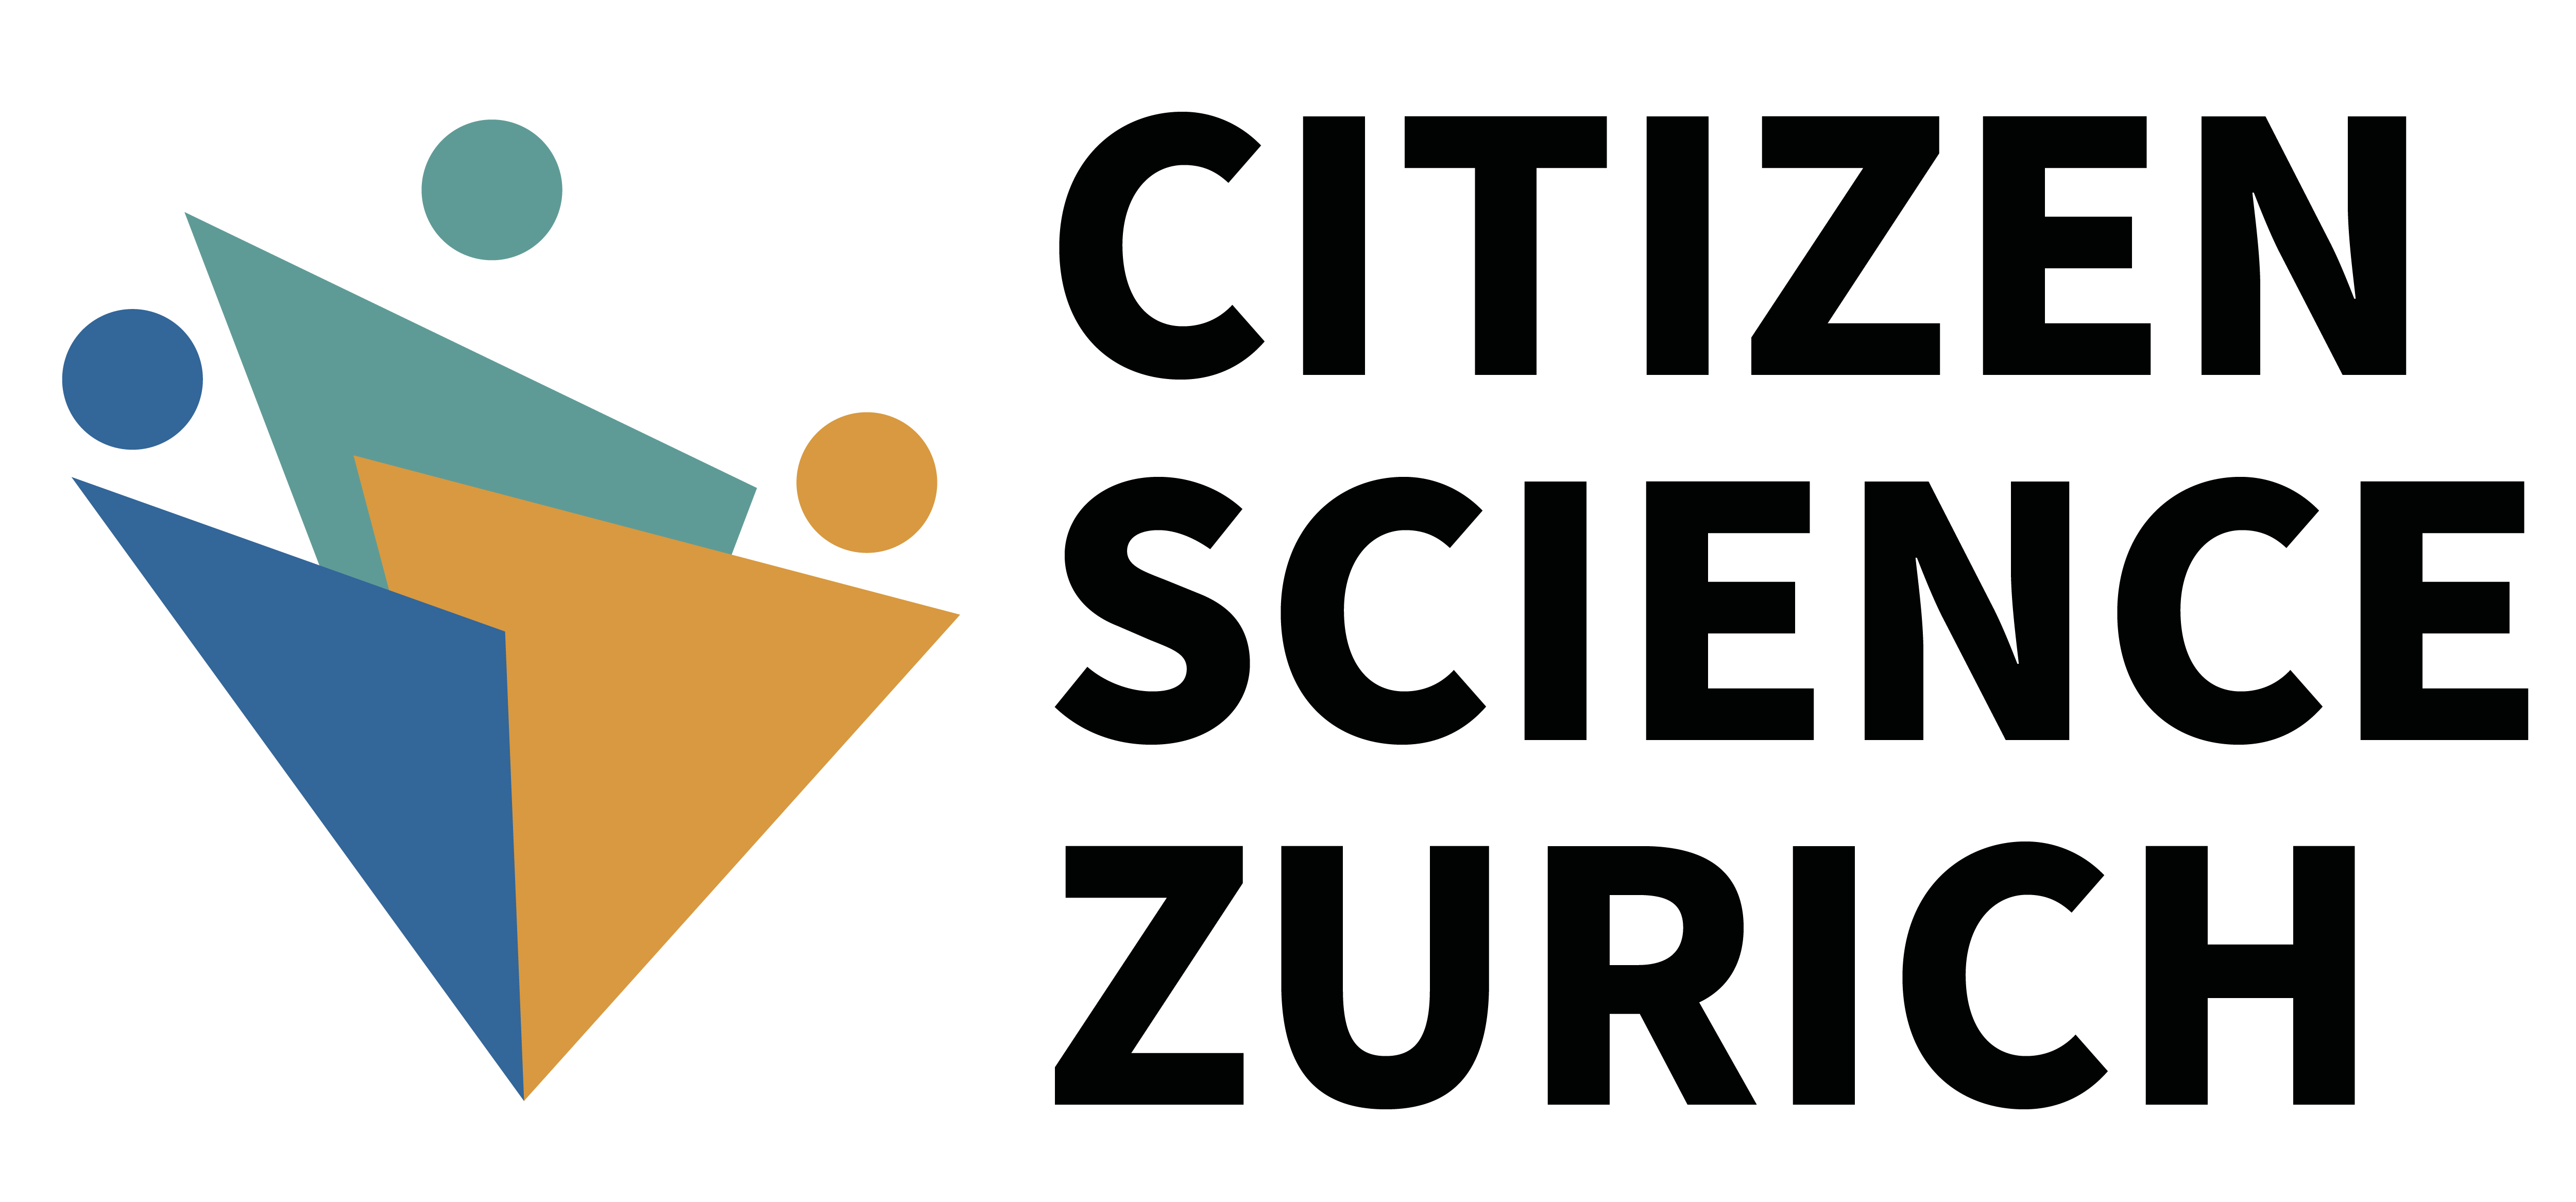 Introduction to Citizen Science